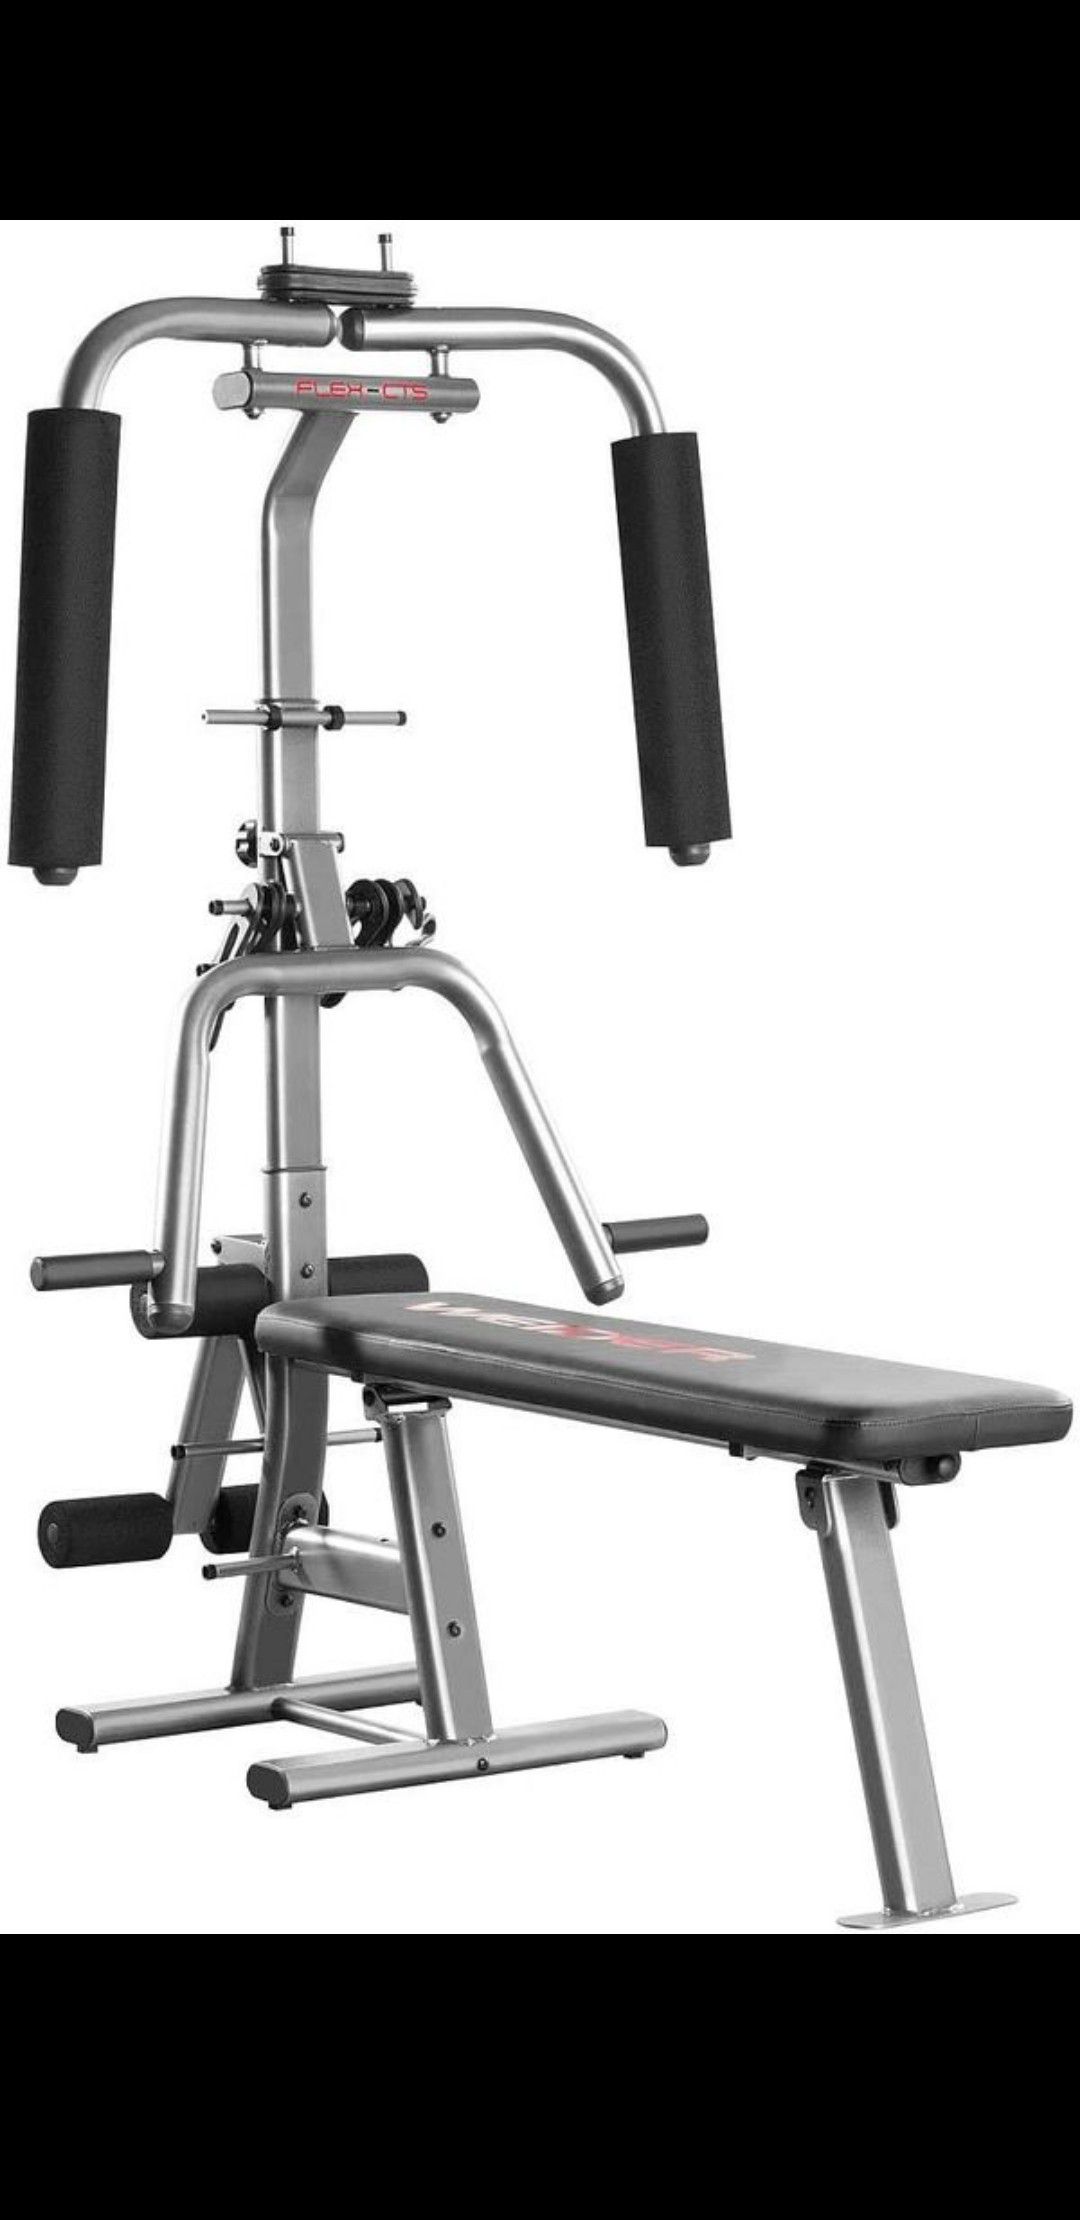 Home gym bench press trade for PS4 or weights